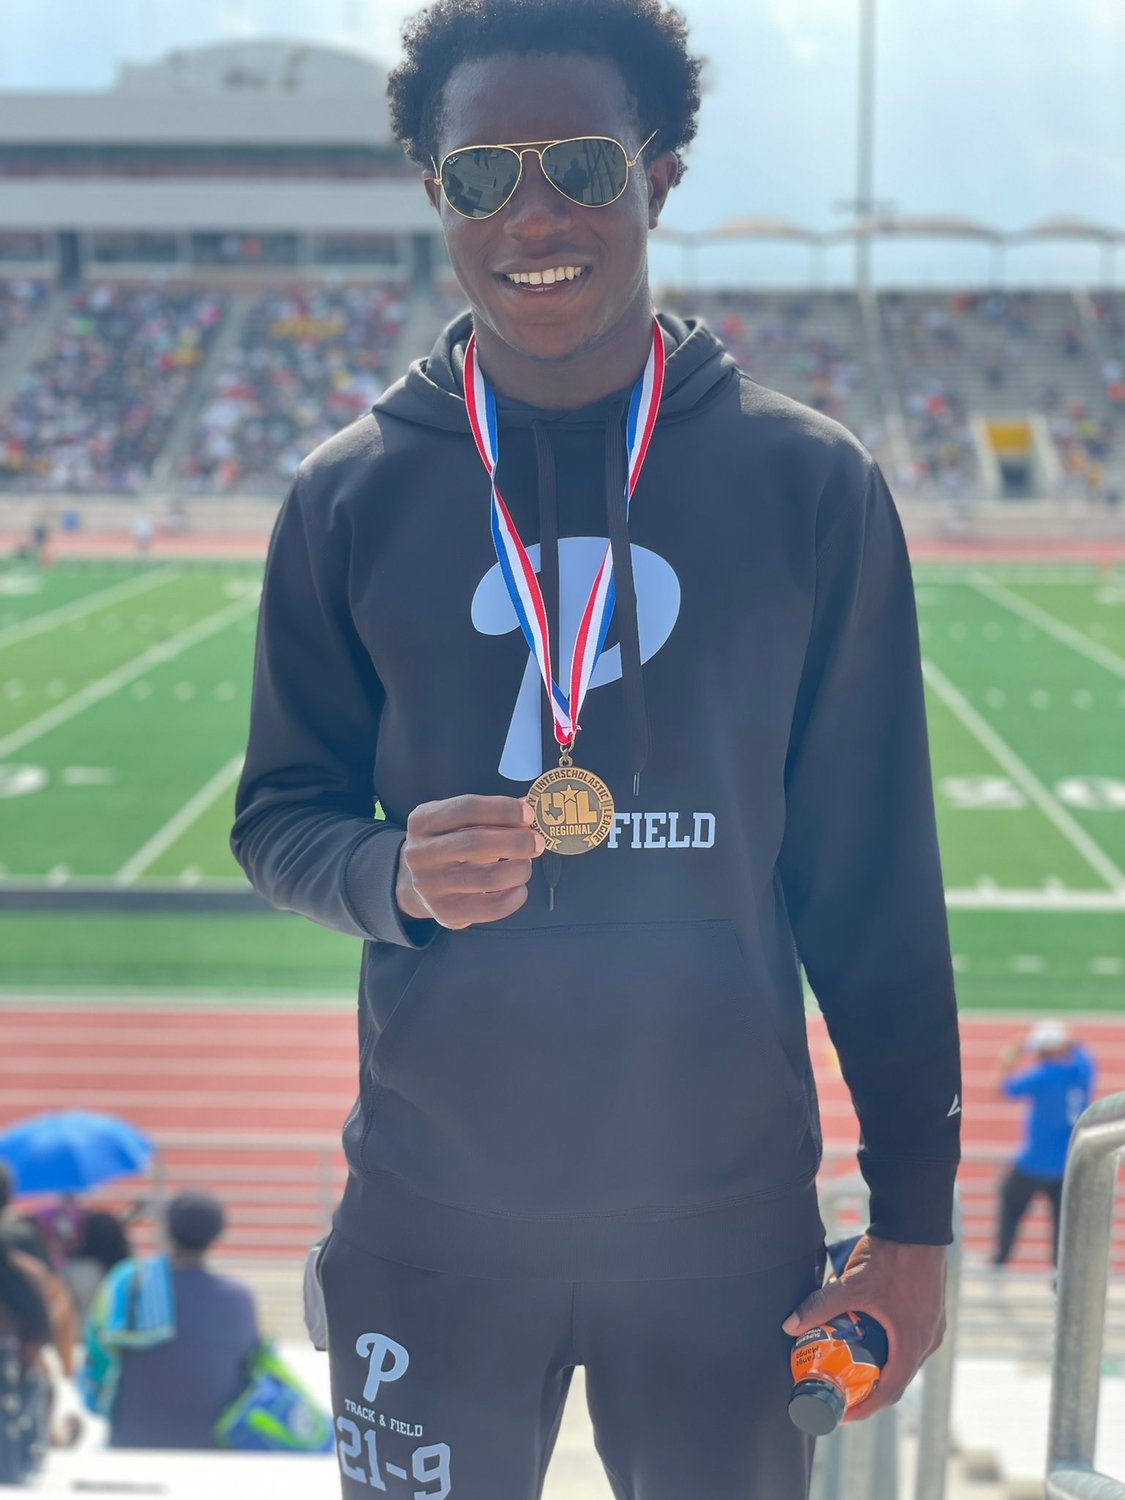 Toheeb Oladipupo placed third in the 100-meter dash at the Classs 5A Region III meet to advance to state.